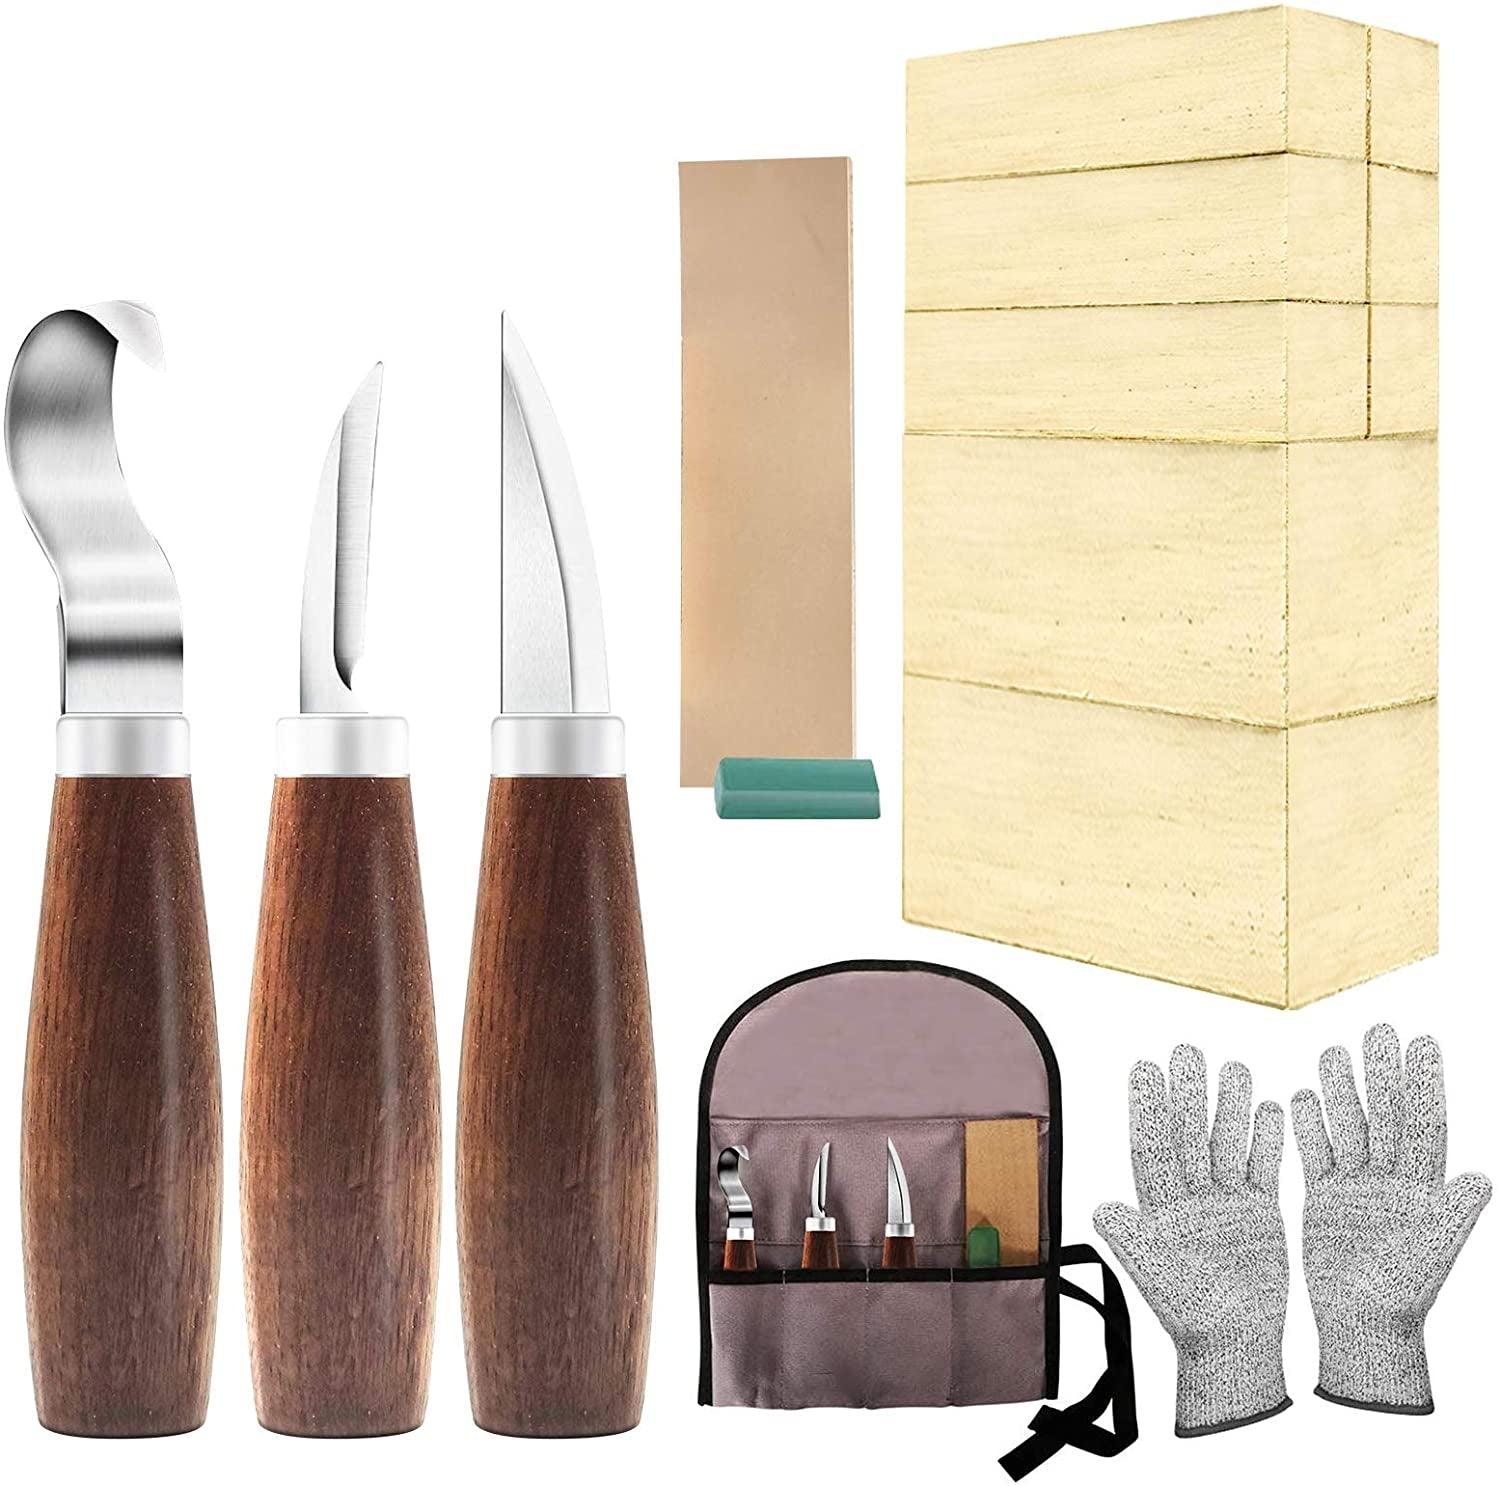 IMYMEE Wood Whittling Kit for Beginners-Complete Whittling Set with 4pcs  Wood Carving Knives & 8pcs Basswood Wood Blocks-Perfect Wood Carving Kit  Set-Includes Wood Carving Tools for Adults and Kids - Coupon Codes